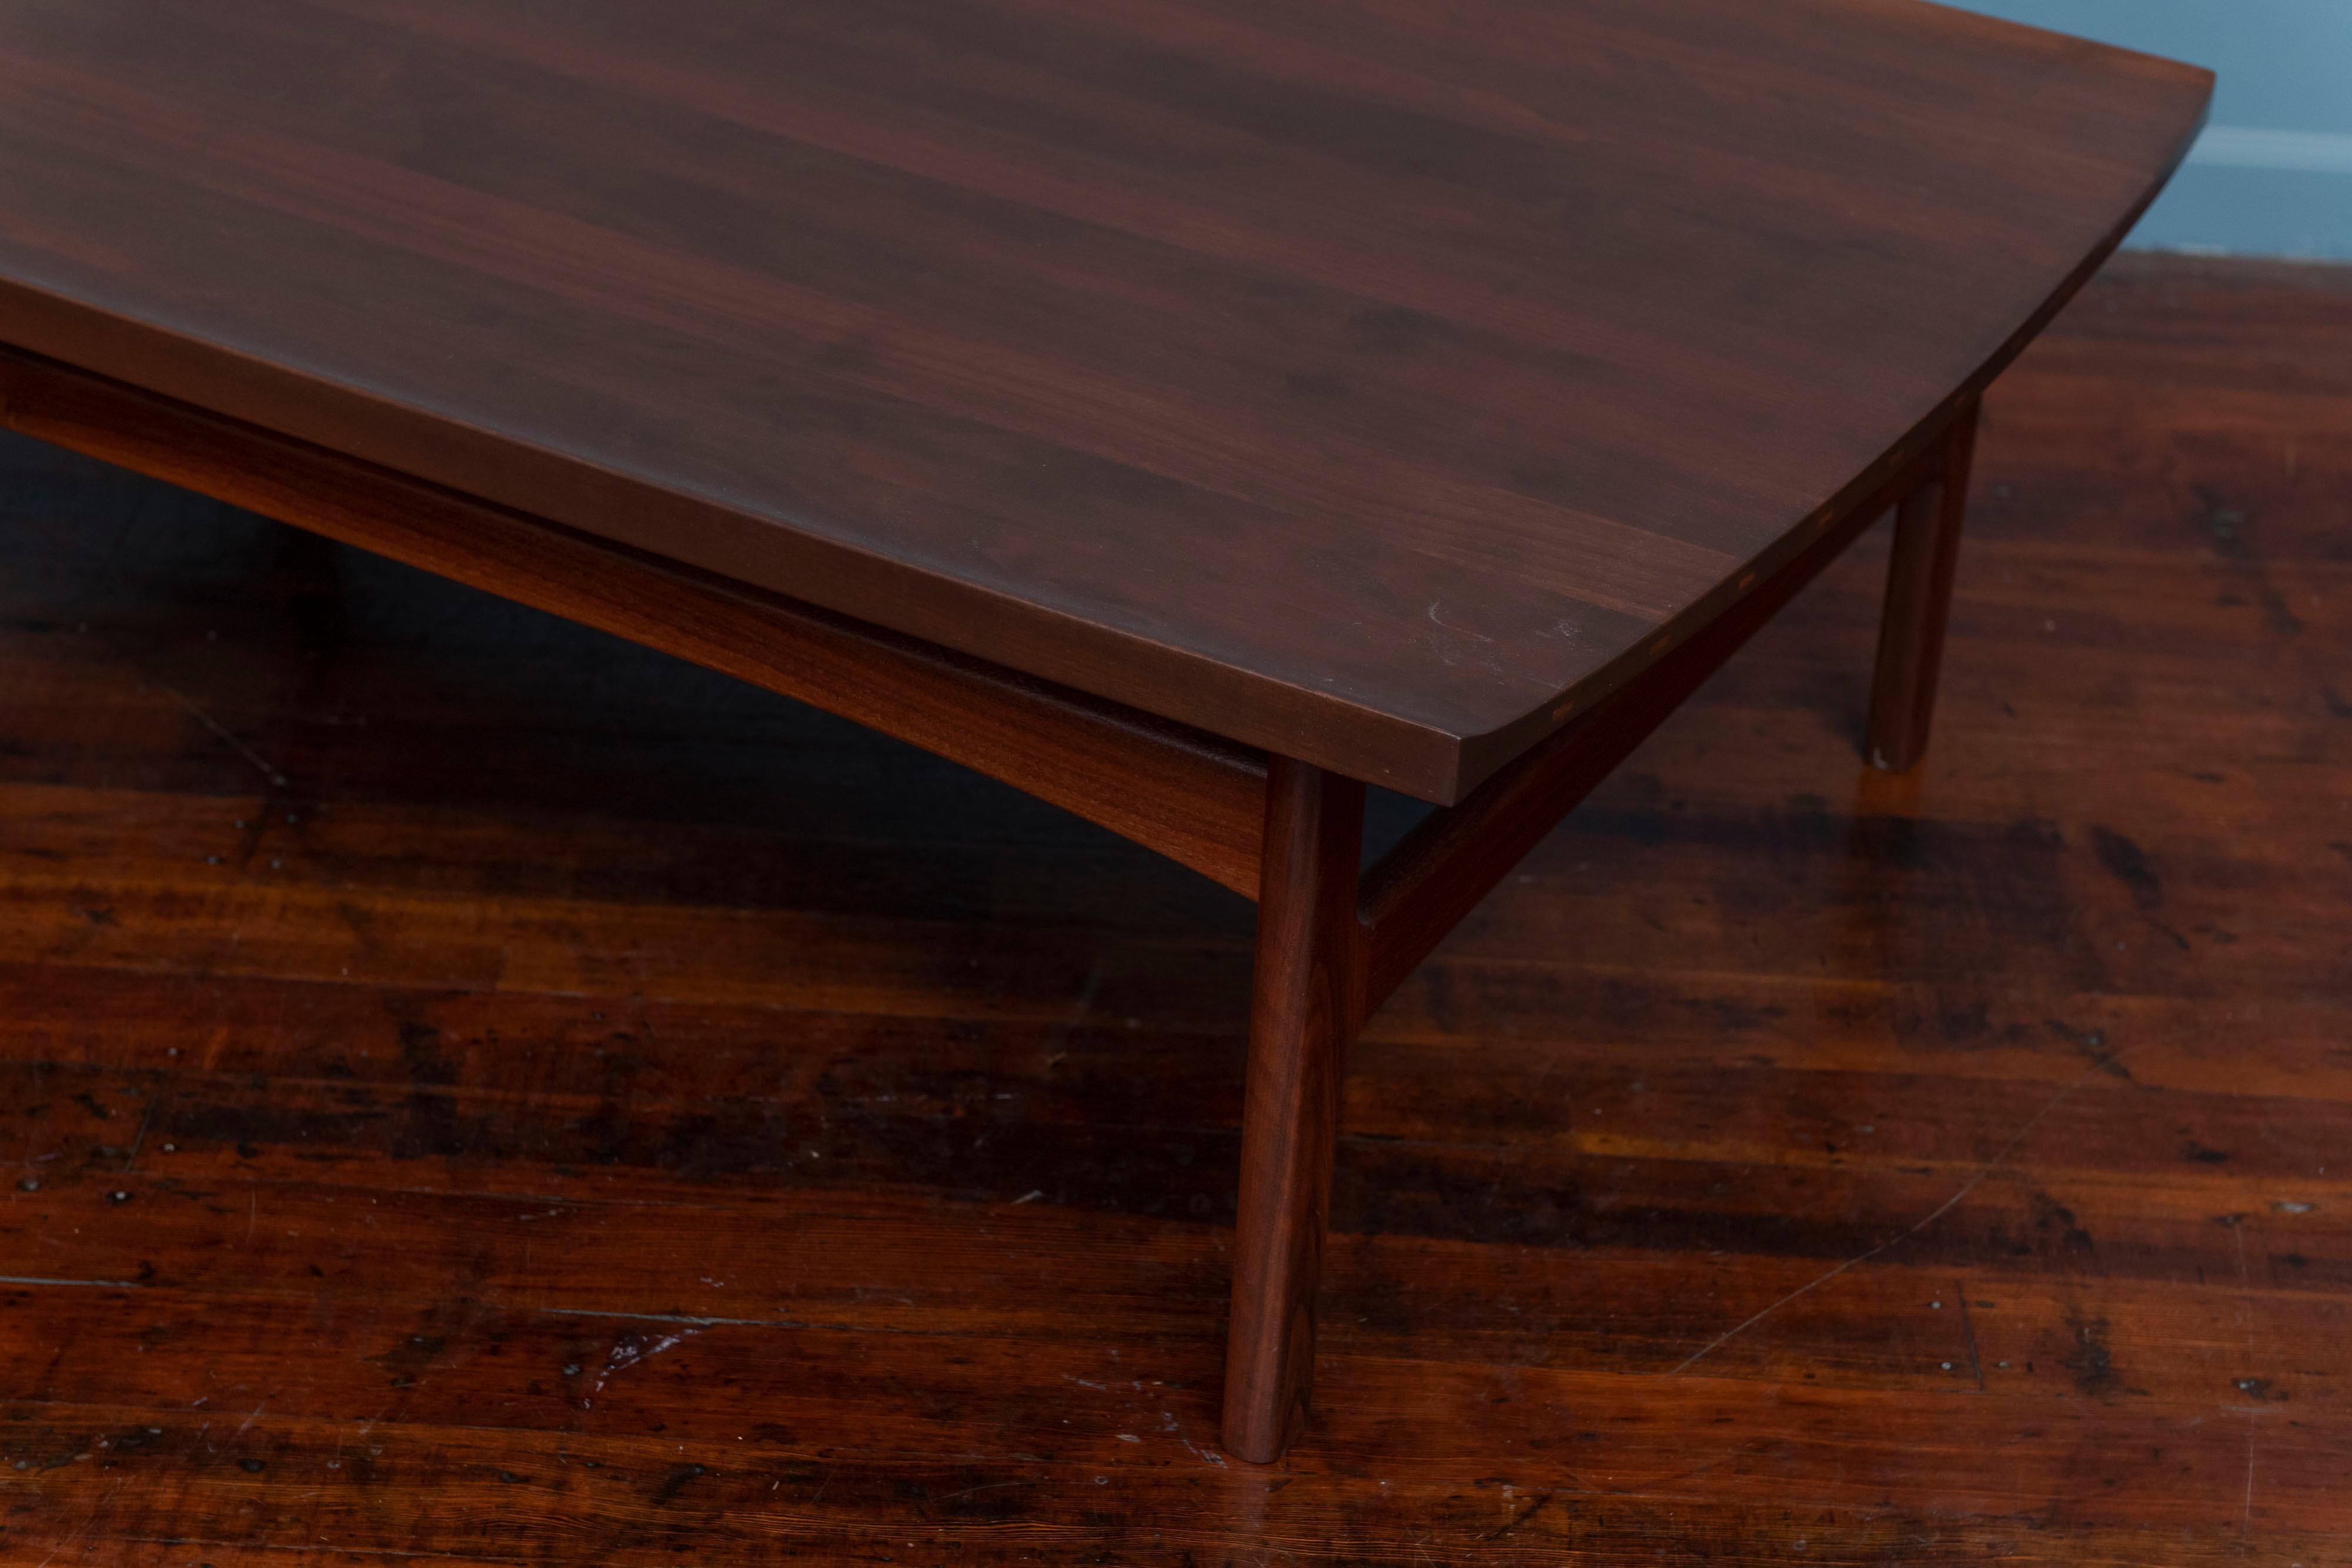 Stunning detailed solid teak Swedish coffee table featuring sculptural lipped edge top with two elegantly curved sides. Exposed wood joinery on the curved edges feature distinctive inlays in lighter, contrasting wood. 
Newly refinished in a dark